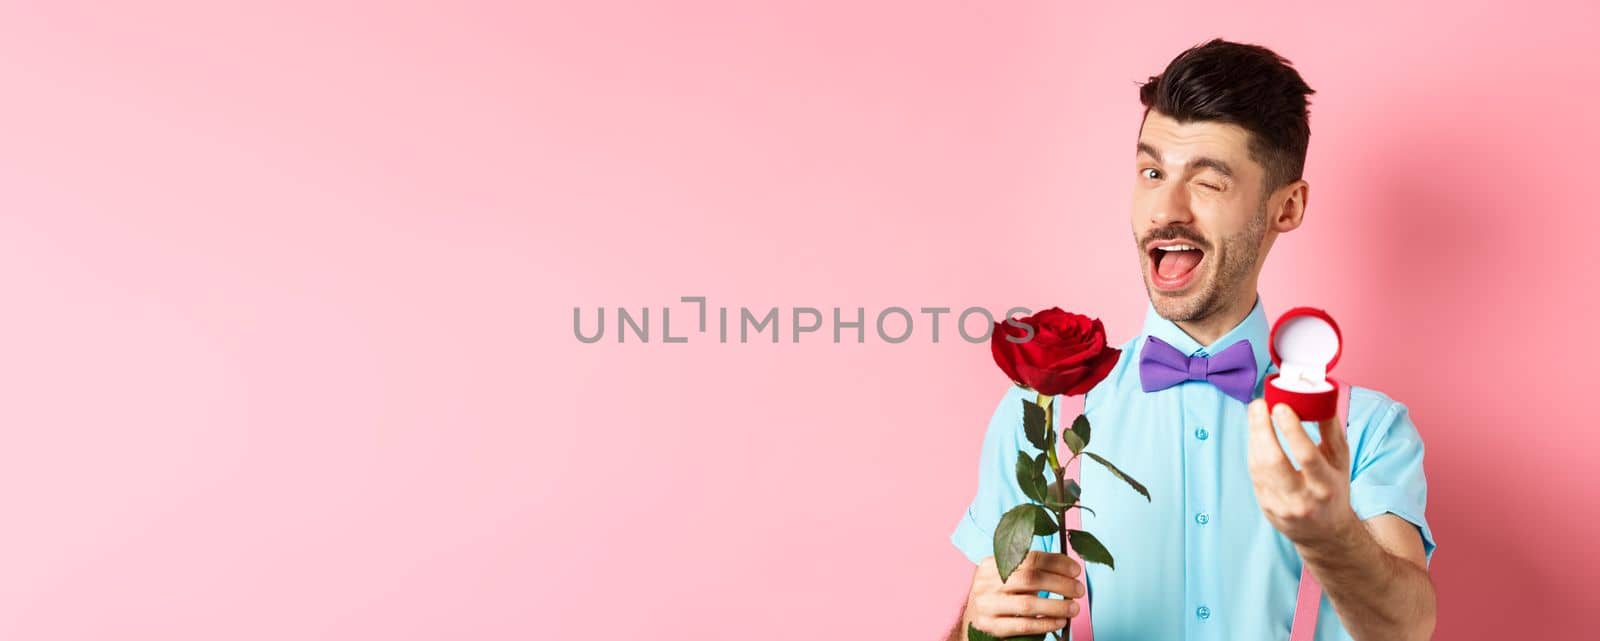 Valentines day. Funny guy making proposal, winking and saying marry me, showing engagement ring with red rose, standing over pink background.